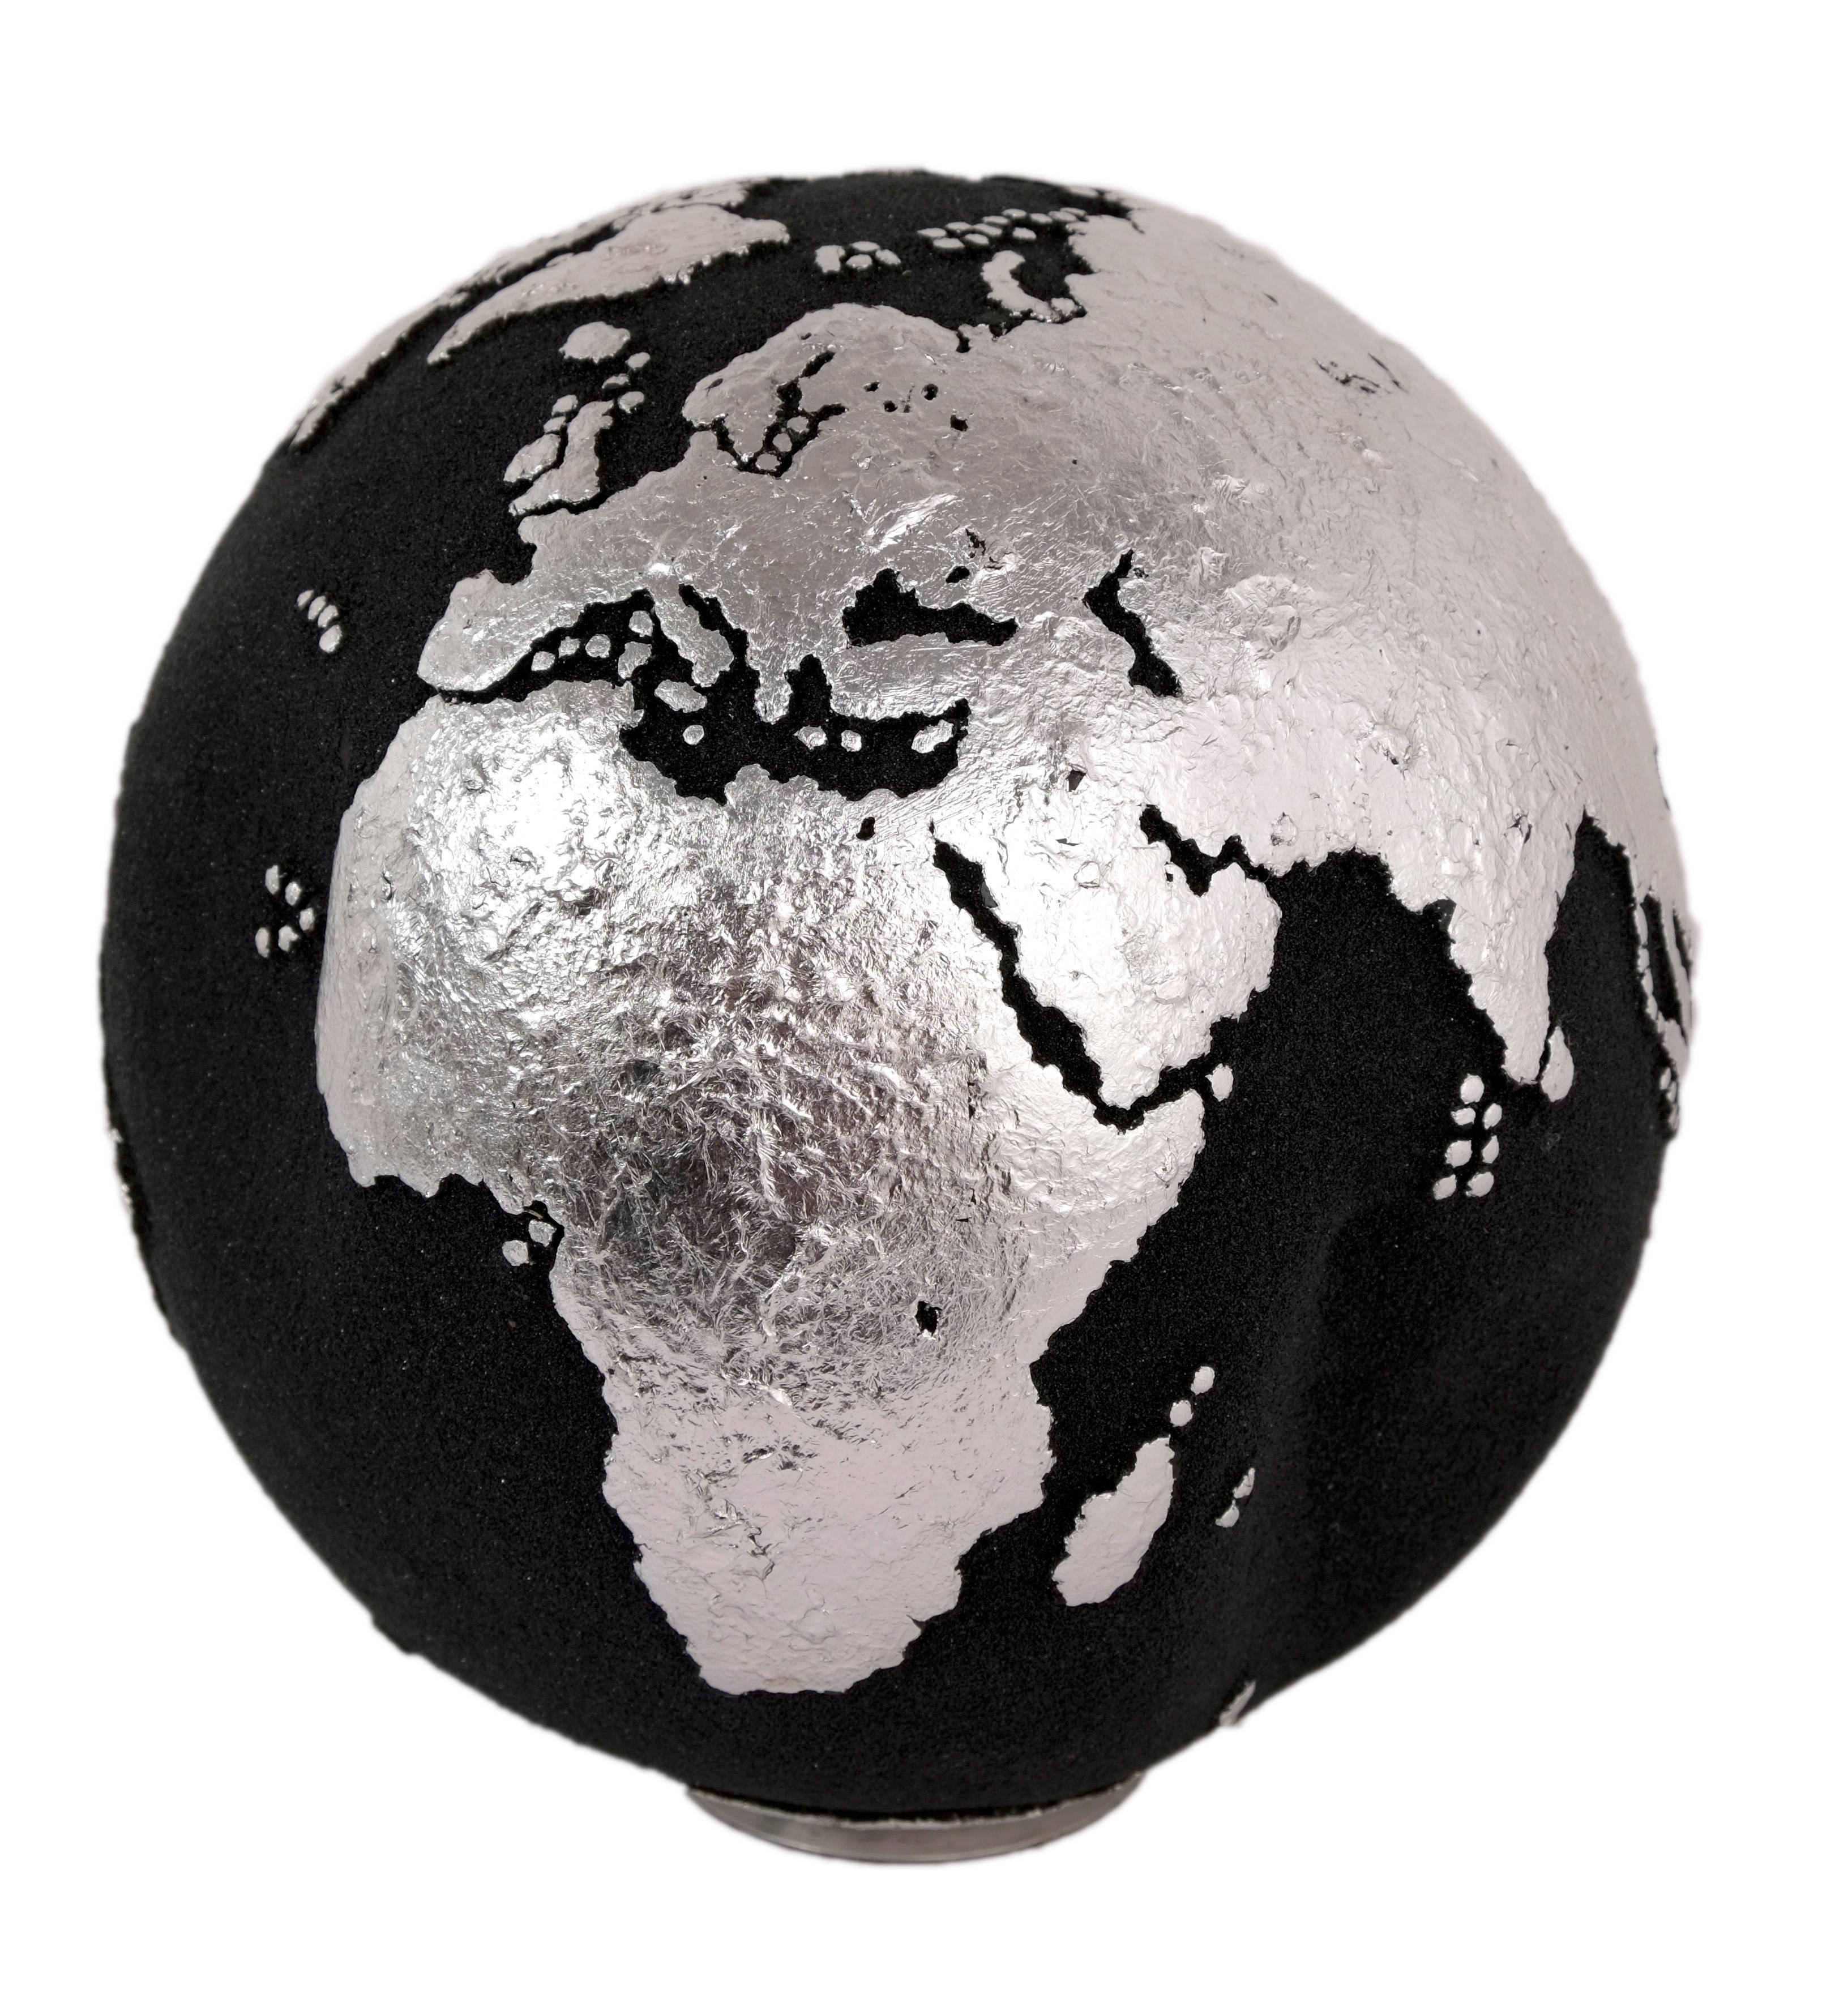 Small is great.
Small size hand-carved wooden globe made of teak root, volcanic sand, and silver leaf, this small piece is a great choice for minimalist themed decor.

Dimension: 9.84 In / 20 cm
Materials: Reclaimed teak root, volcanic sand and